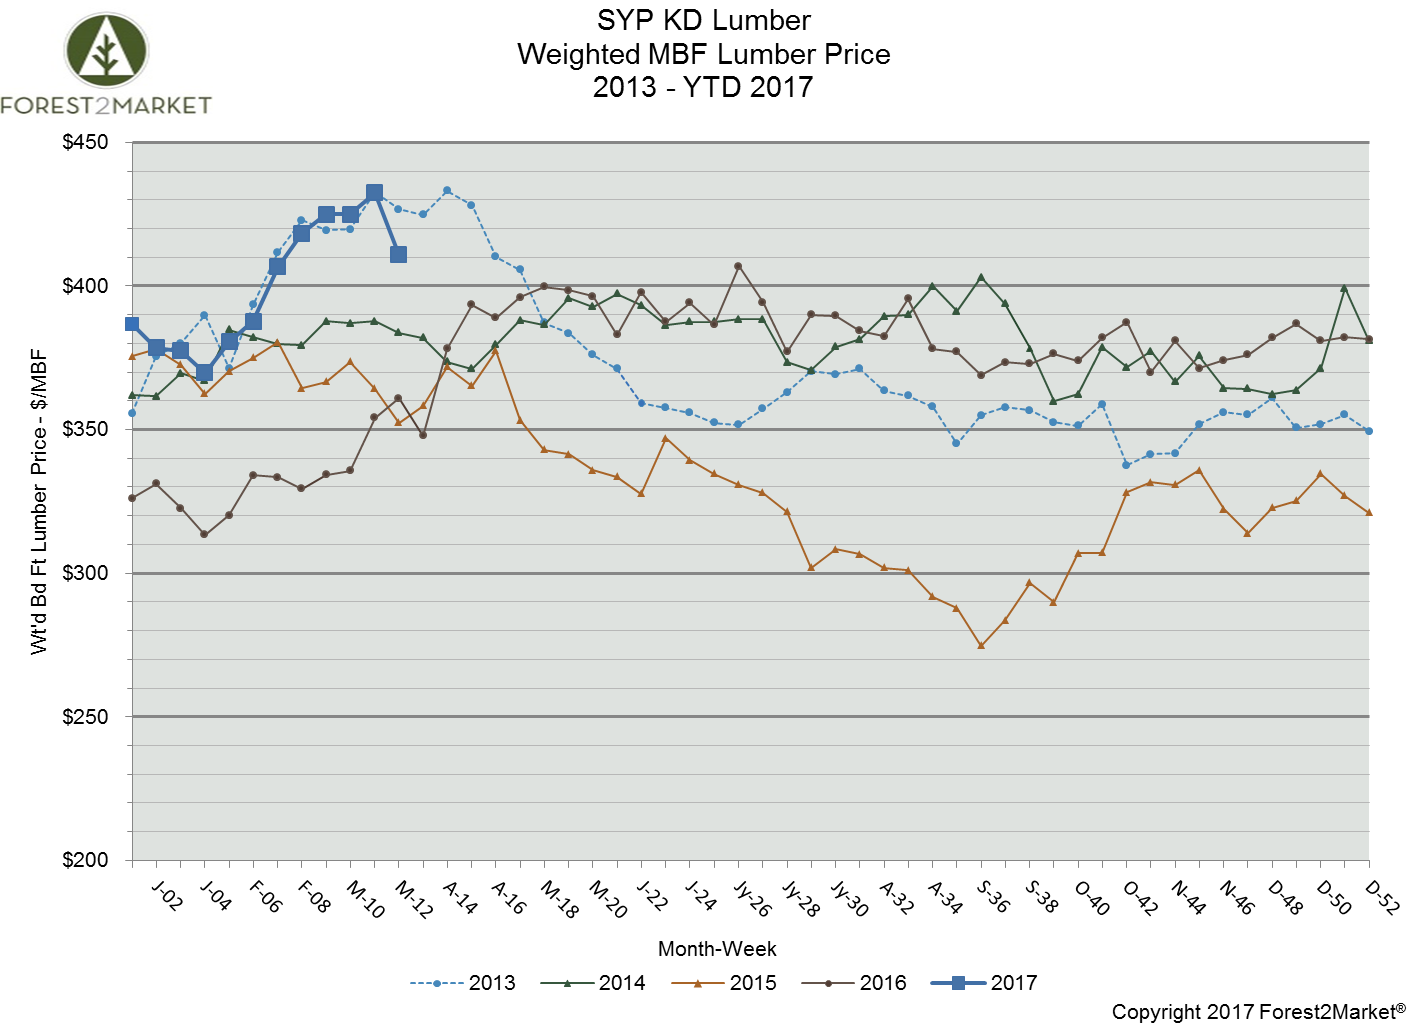 Southern Yellow Pine Lumber Prices Remain High Through March ‘17